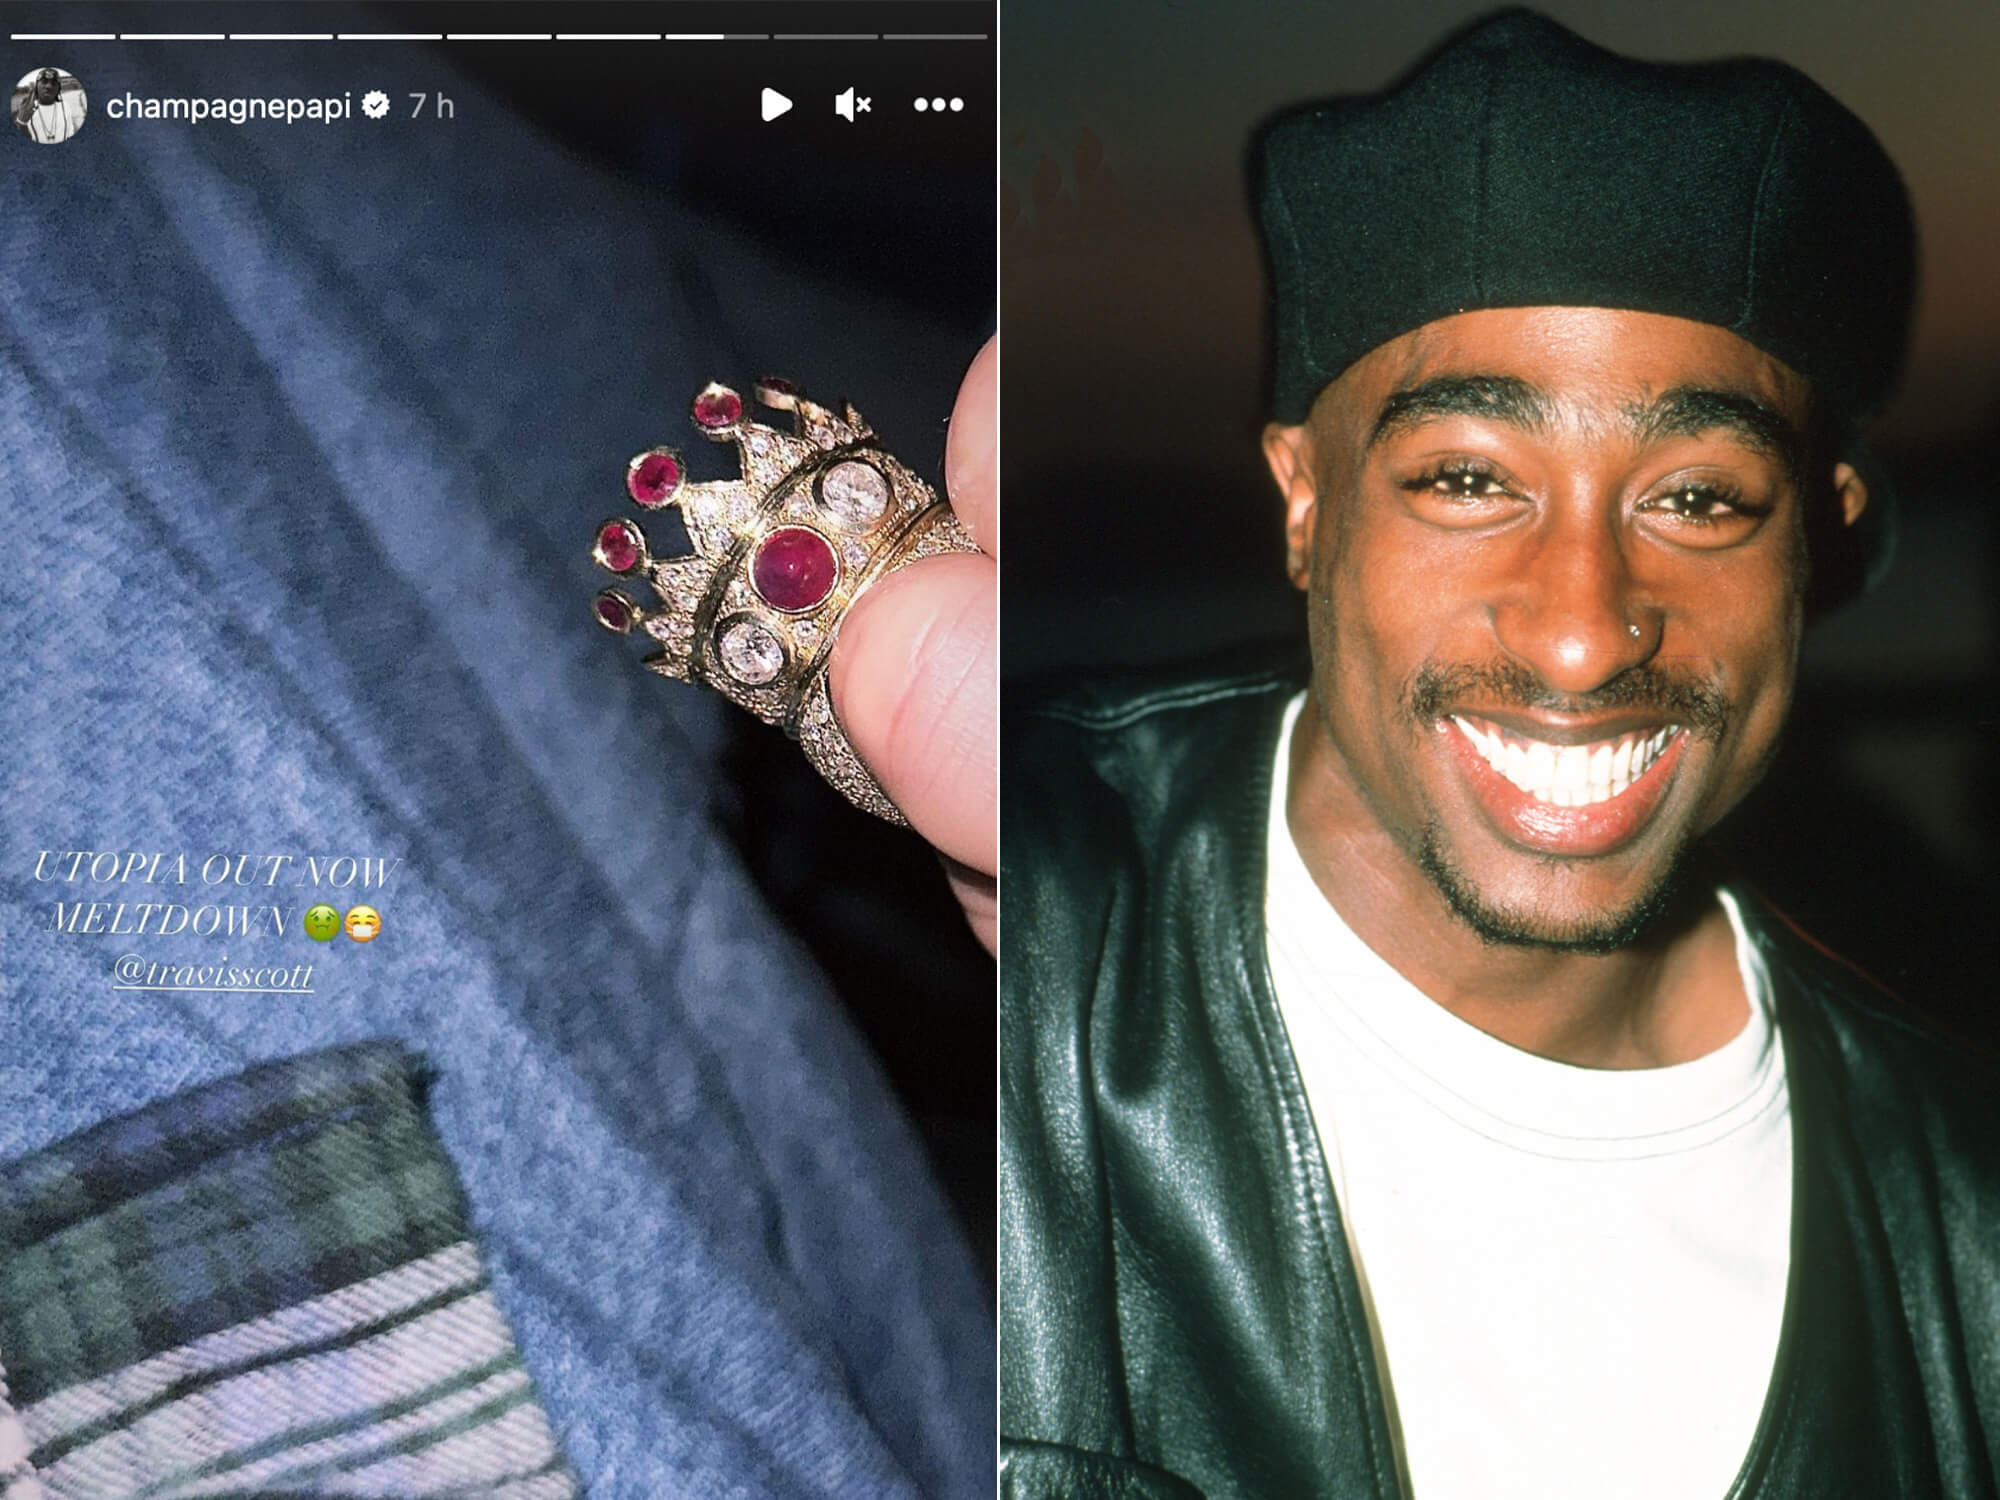 Left - screen shot of Drake's story. He is holding the ring. Right - a portrait photograph of Tupac